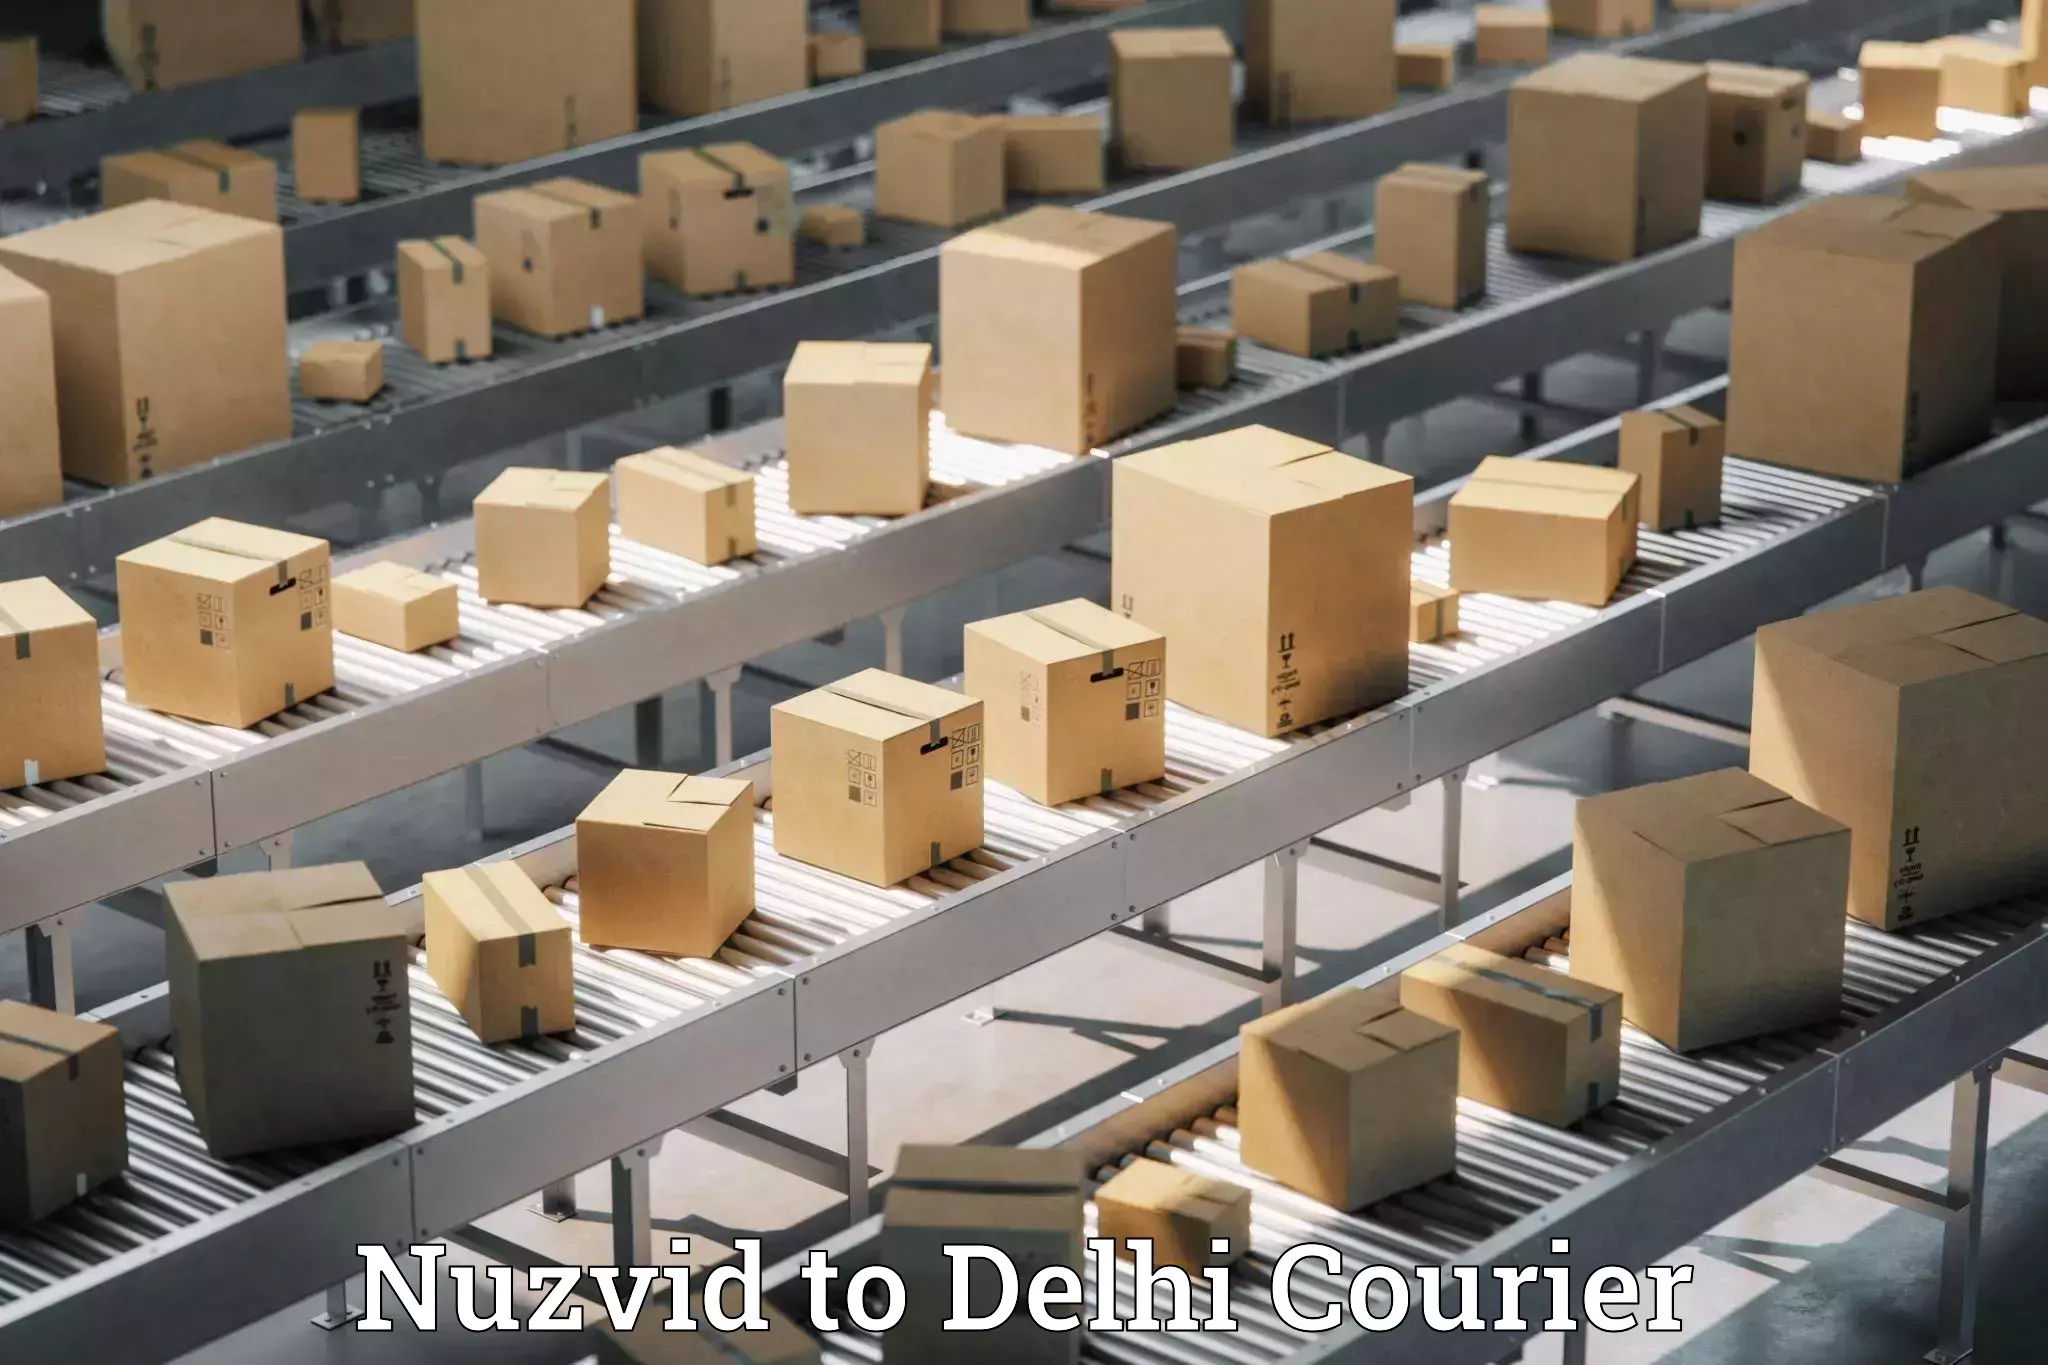 Round-the-clock parcel delivery Nuzvid to Lodhi Road